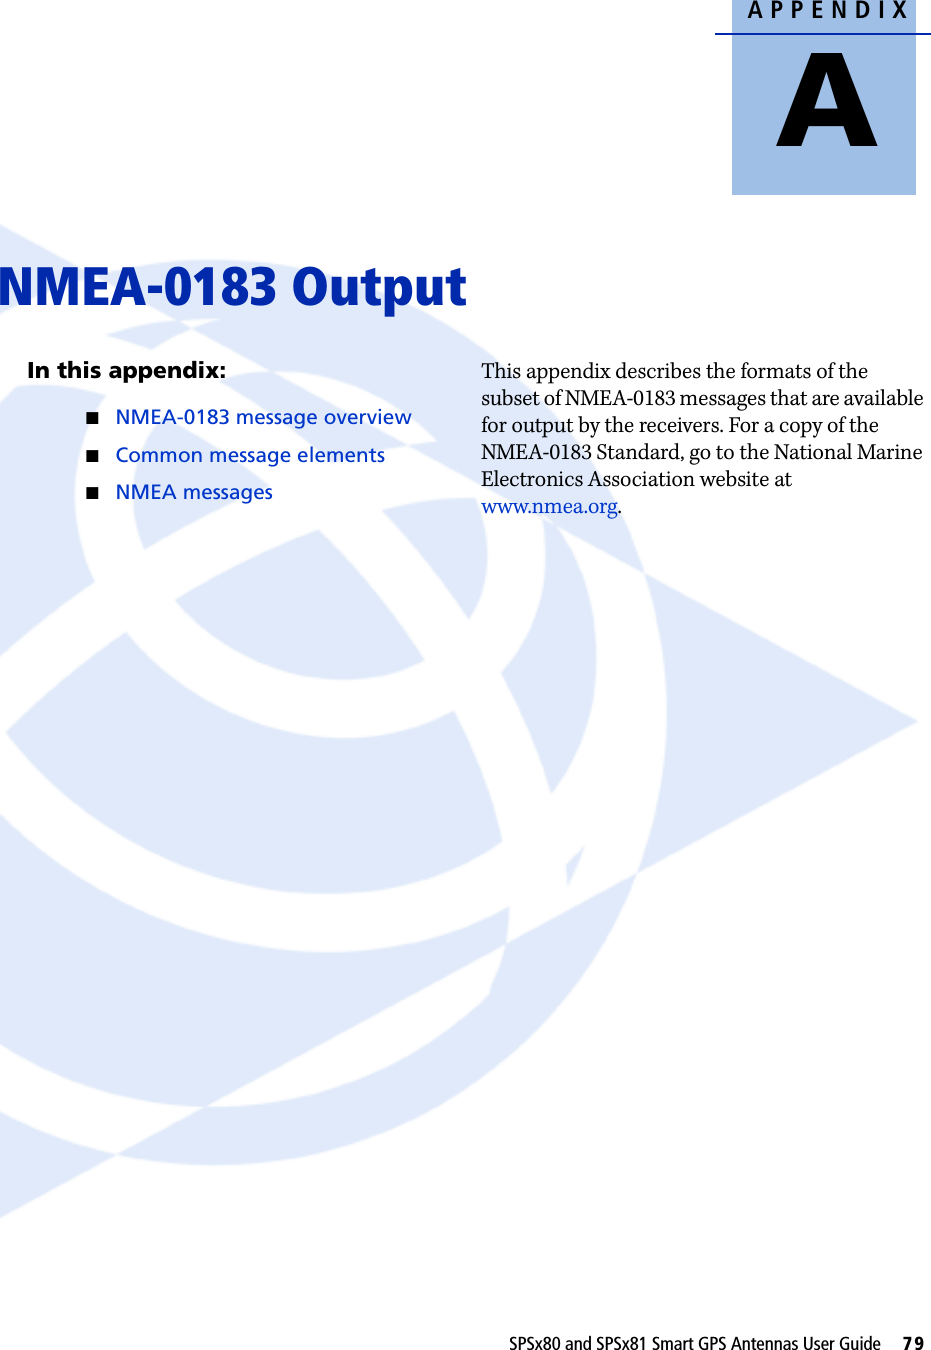 APPENDIXASPSx80 and SPSx81 Smart GPS Antennas User Guide     79NMEA-0183 Output AIn this appendix:QNMEA-0183 message overviewQCommon message elementsQNMEA messagesThis appendix describes the formats of the subset of NMEA-0183 messages that are available for output by the receivers. For a copy of the NMEA-0183 Standard, go to the National Marine Electronics Association website at www.nmea.org.